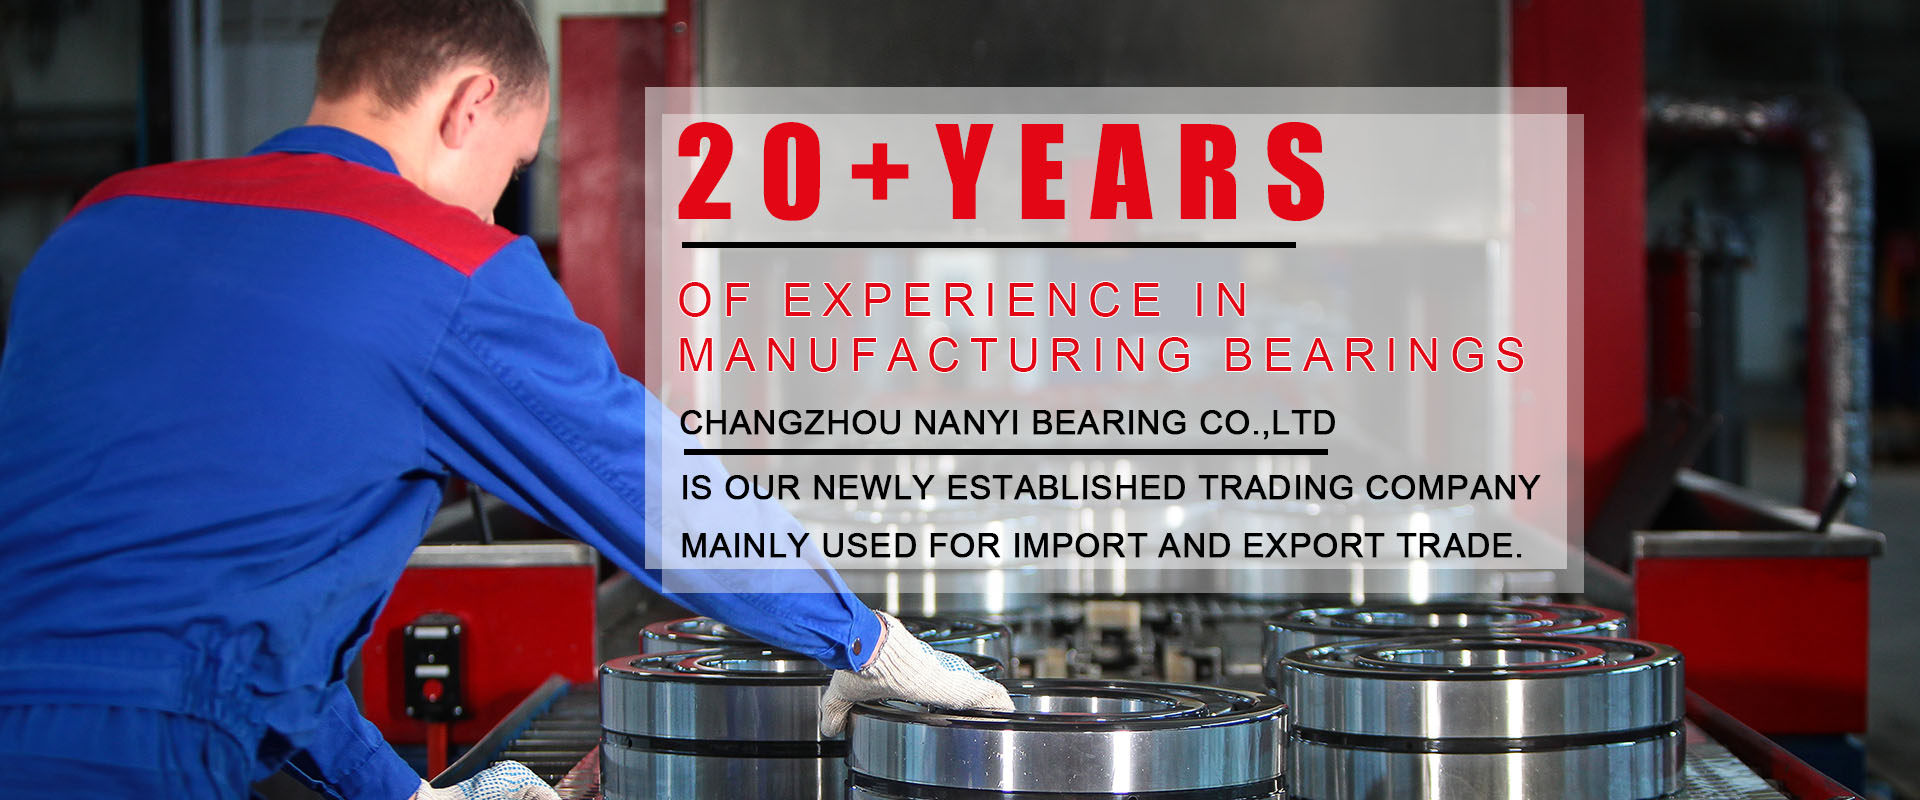 20+ years of experience manufacturing bearings